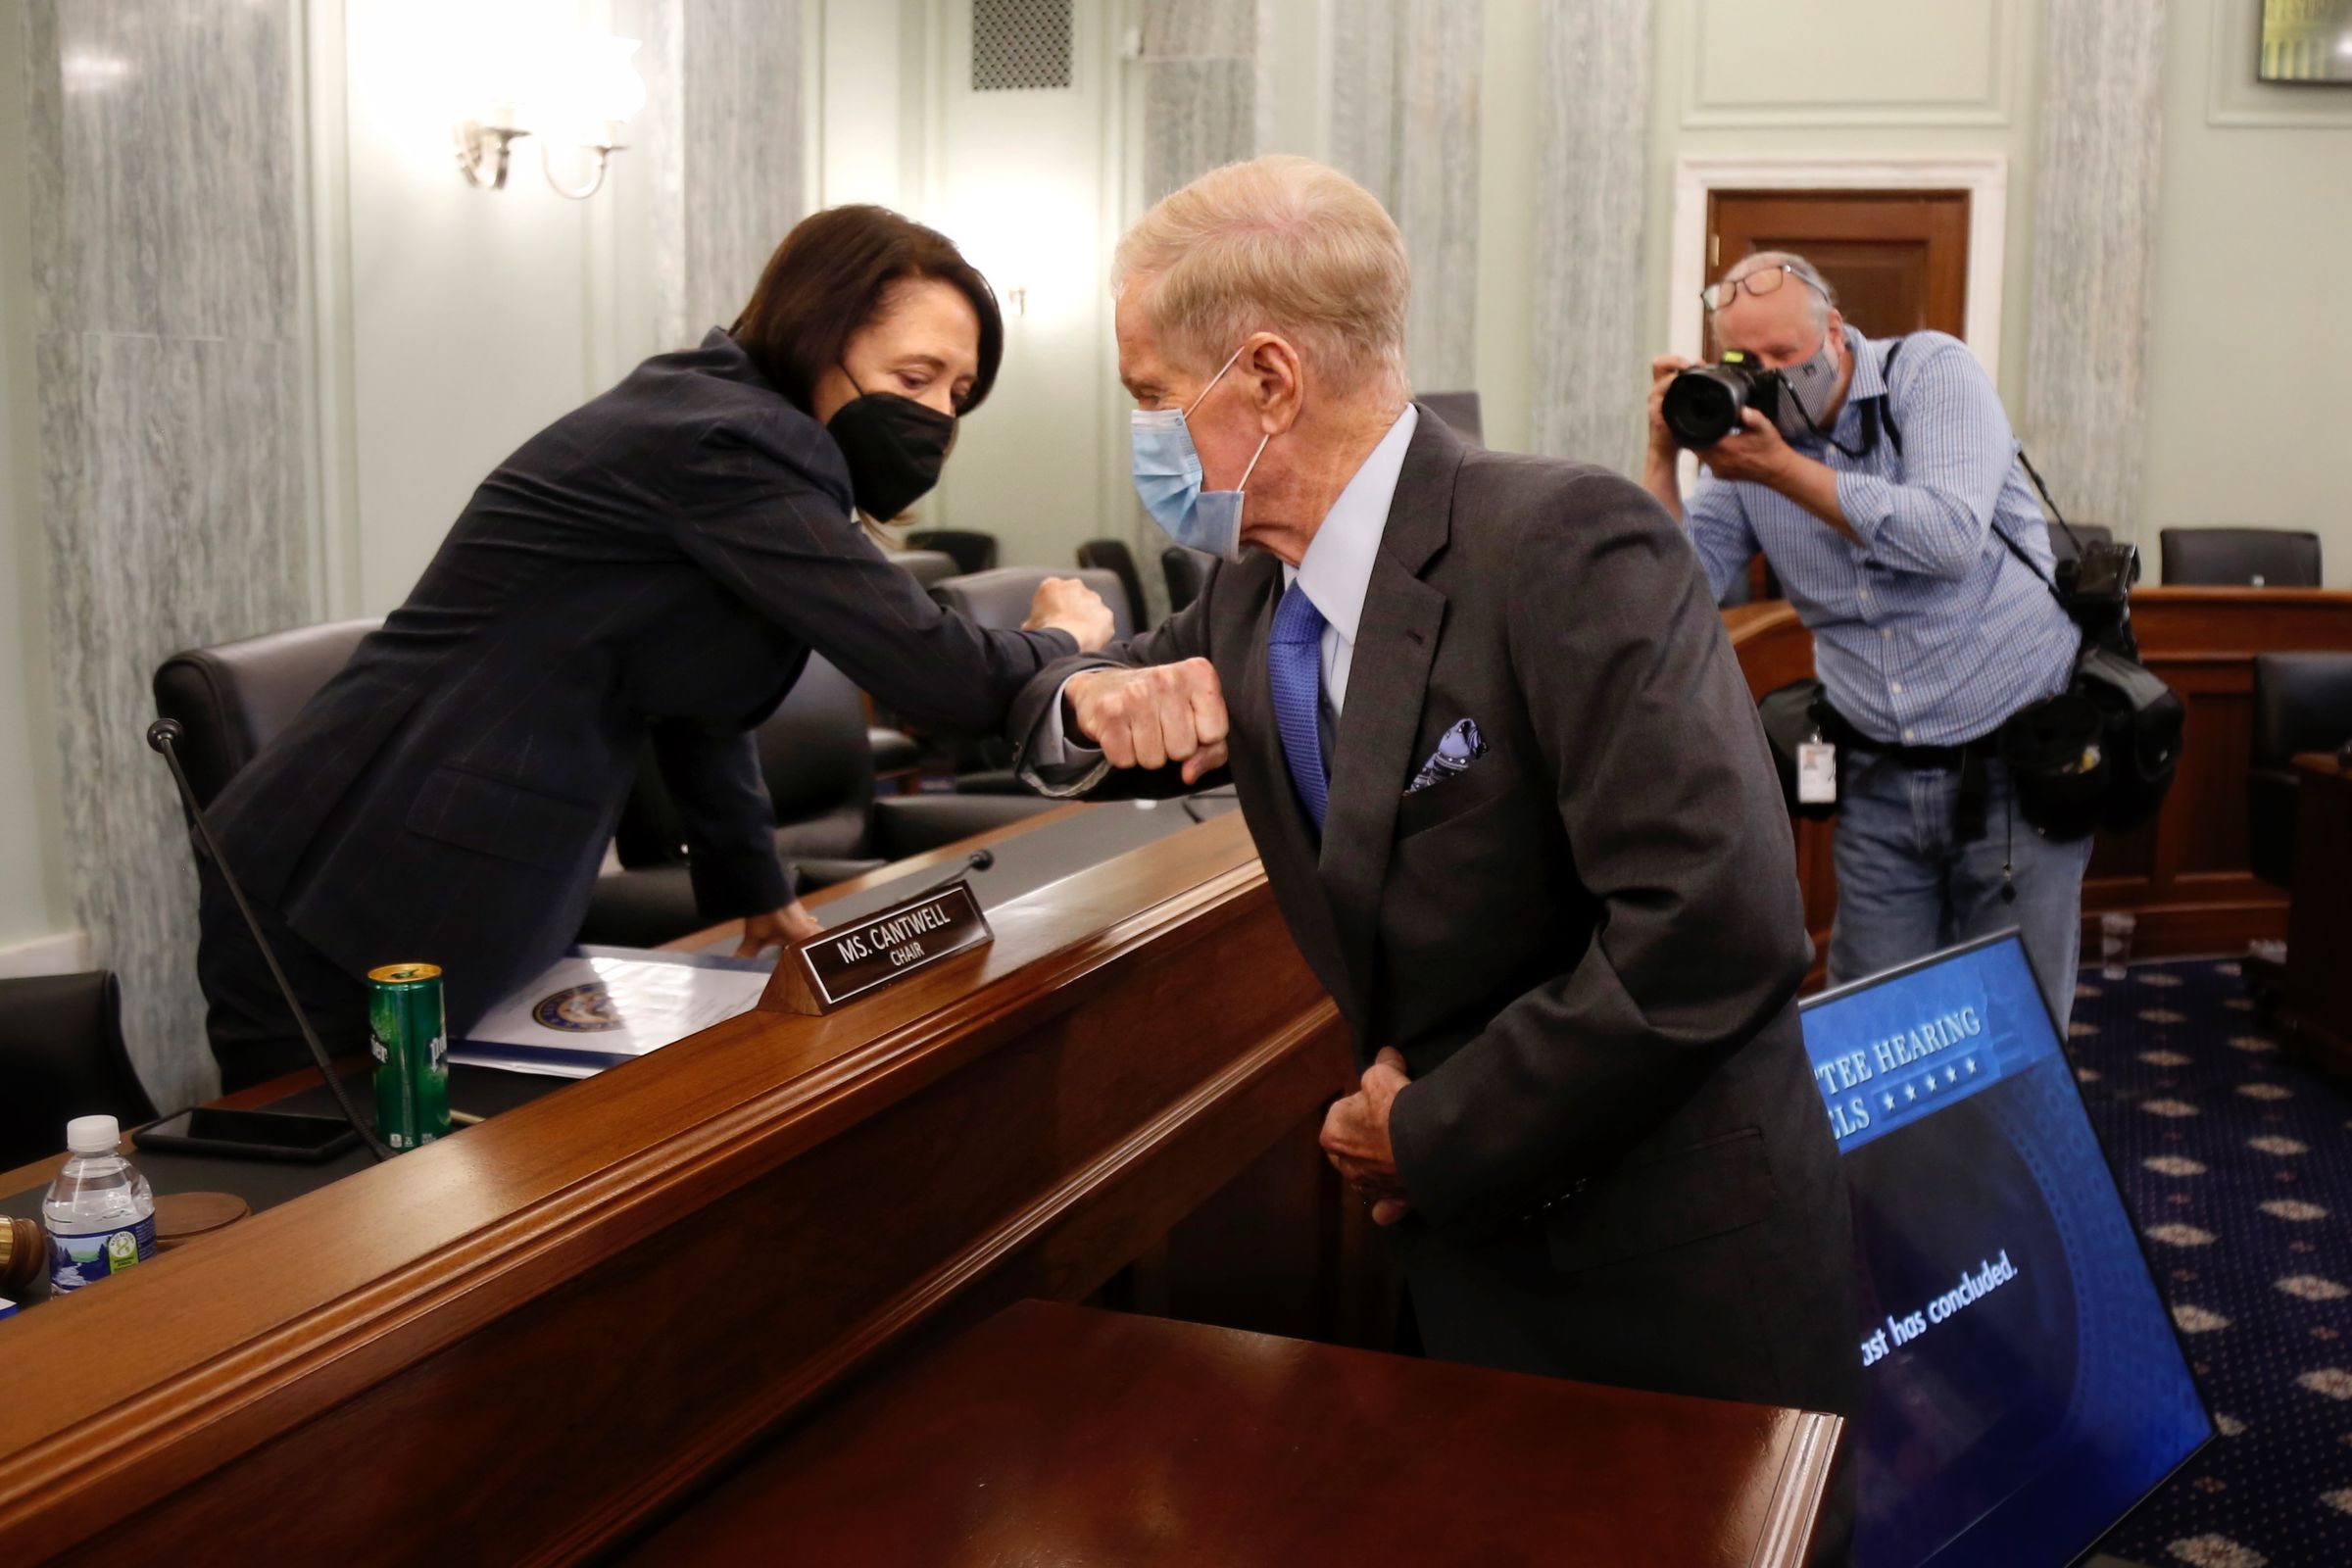 Then-nominee for NASA administrator Bill Nelson bumps elbows with Sen. Maria Cantwell, chair of the Senate commerce committee that oversees NASA, after his confirmation hearing on April 21st, 2020.